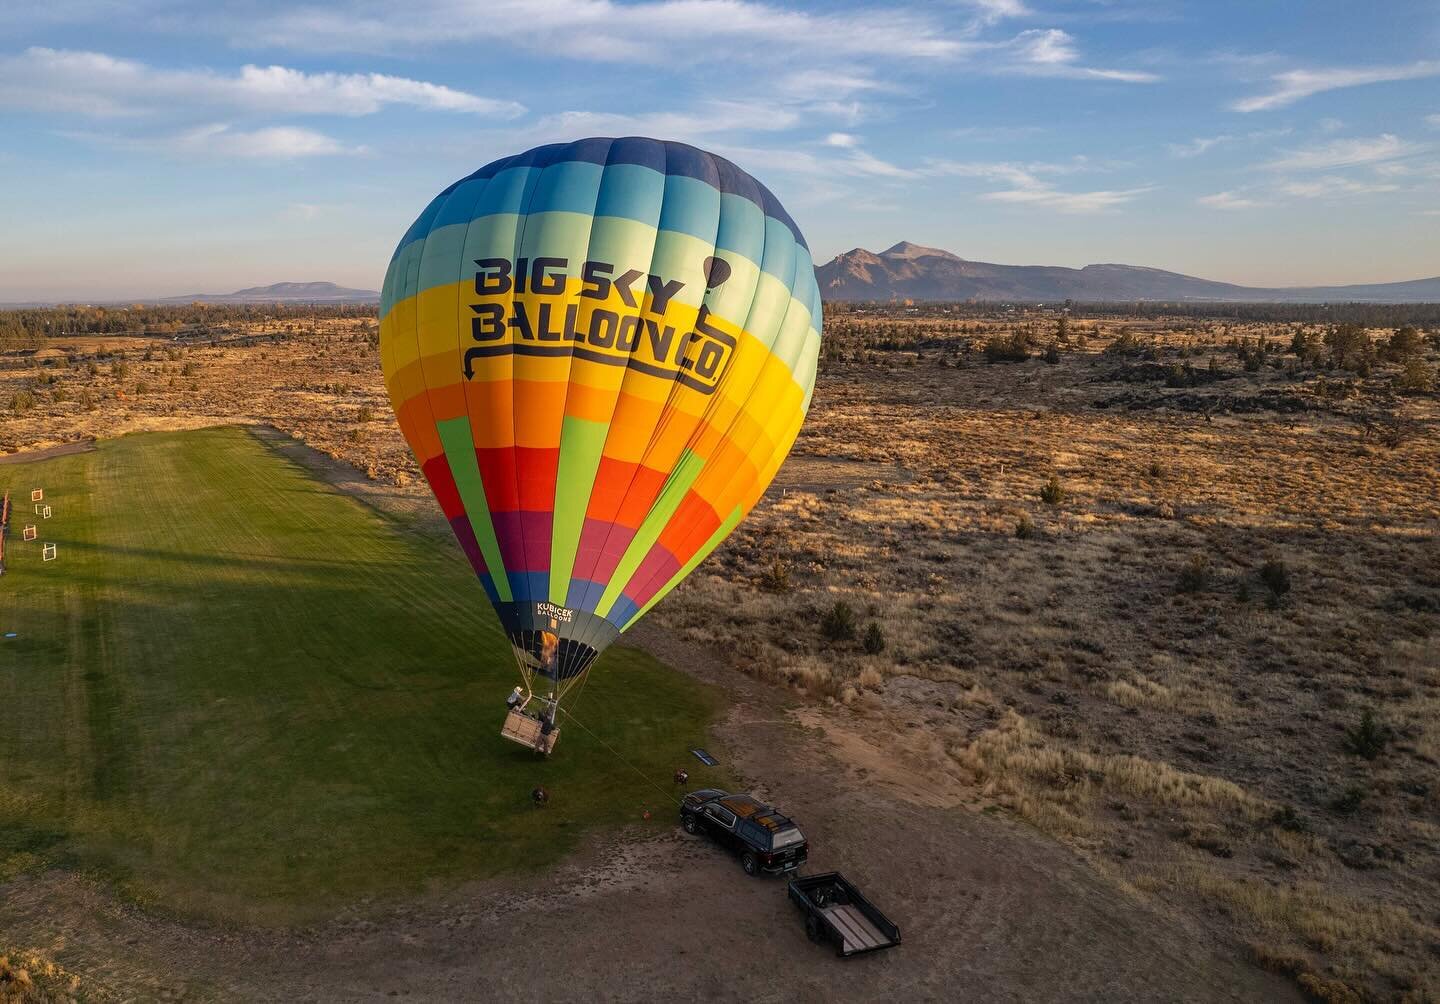 Book your breathtaking adventure with us @bigskyballoonco 🎈🌄

Let the beauty of Smith Rock and the gorgeous cascades take your breath away
 

📸 : @howardlipin
 
#Hotairballoonrides #Centraloregon #SkyHighAdventures #UpUpAndAway #DiscoverTheSkies